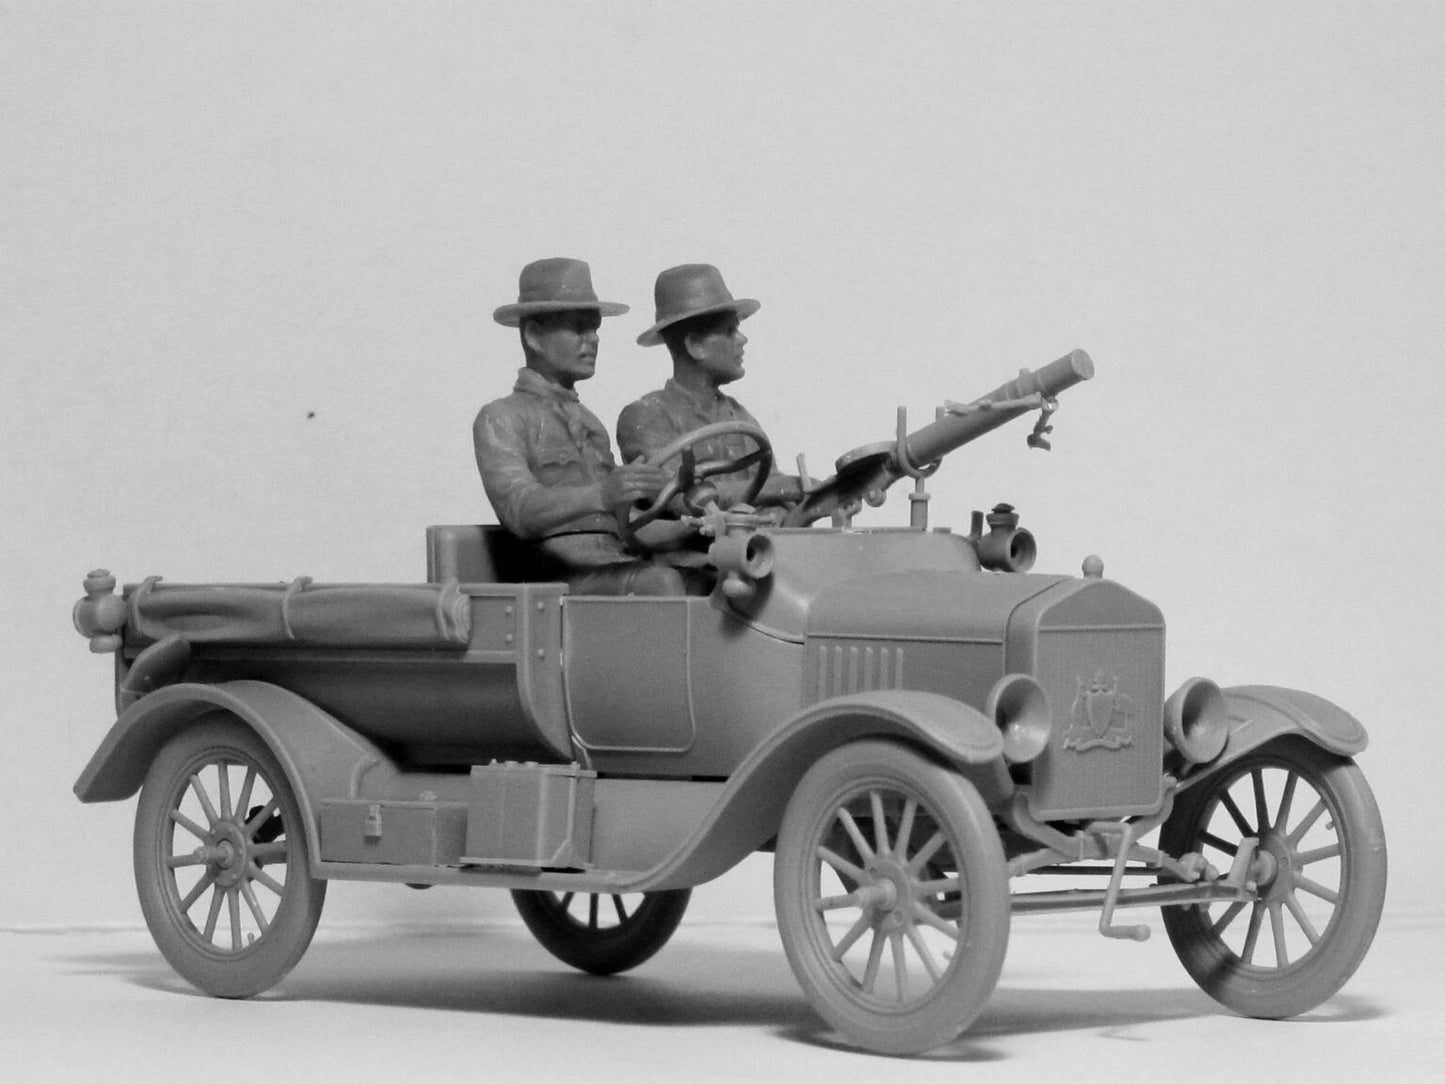 ICM 1/35 ANZAC Drivers 1917 -1918 (2 figures only No Vehicle)